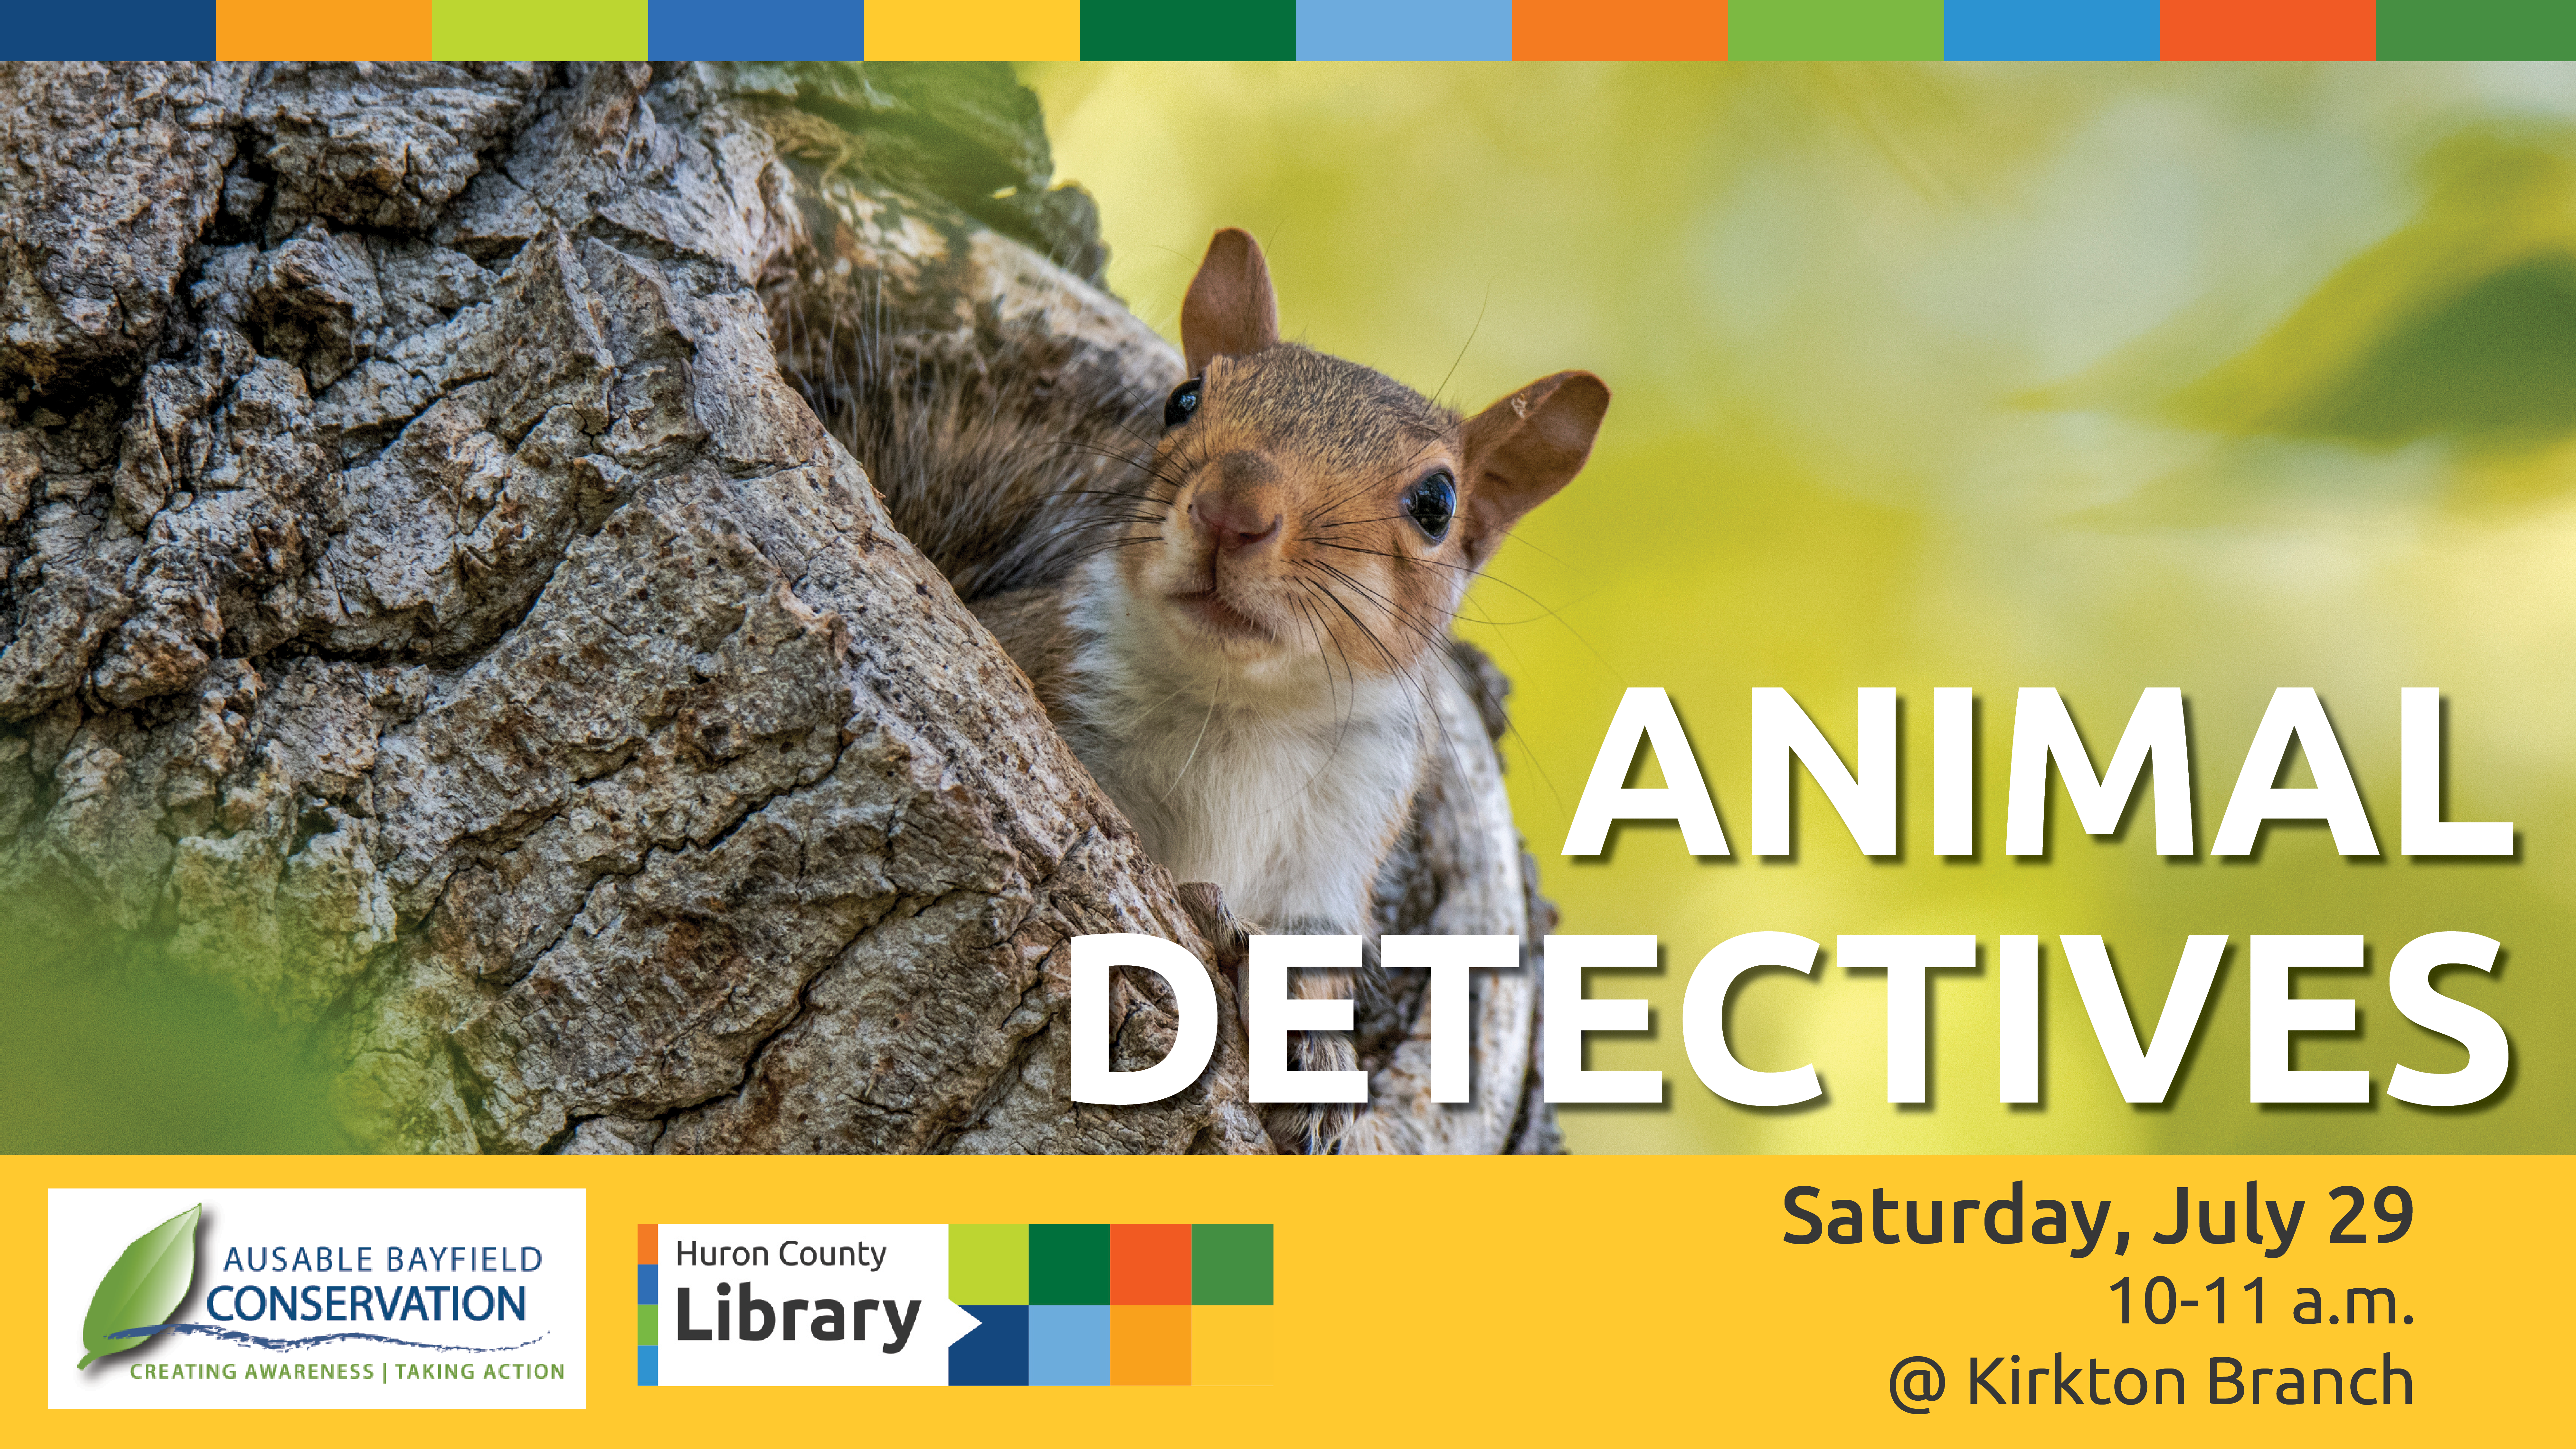 Image of a squirrel in a tree with text promoting Animal Detectives at Kirkton Branch